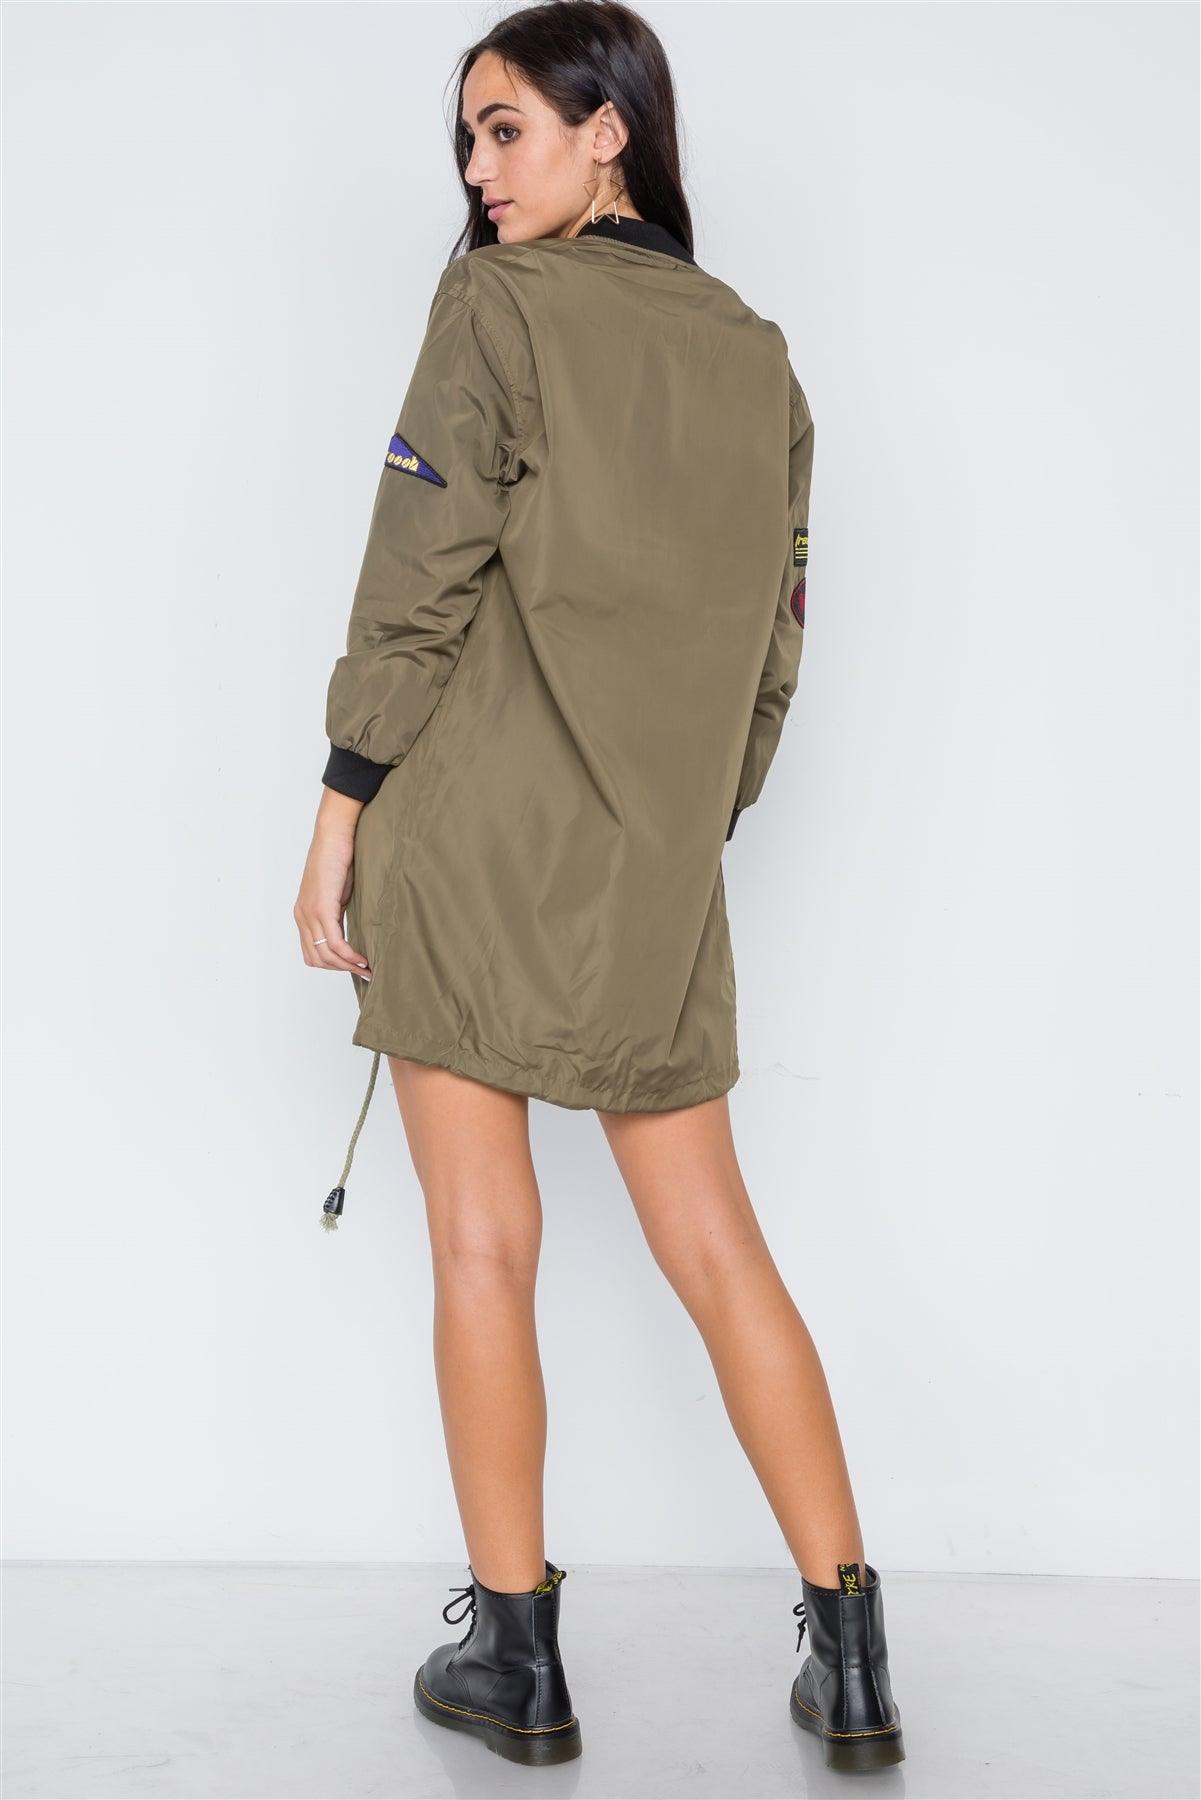 Olive Graphic Patch Long Sleeve Bomber Jacket /2-2-3